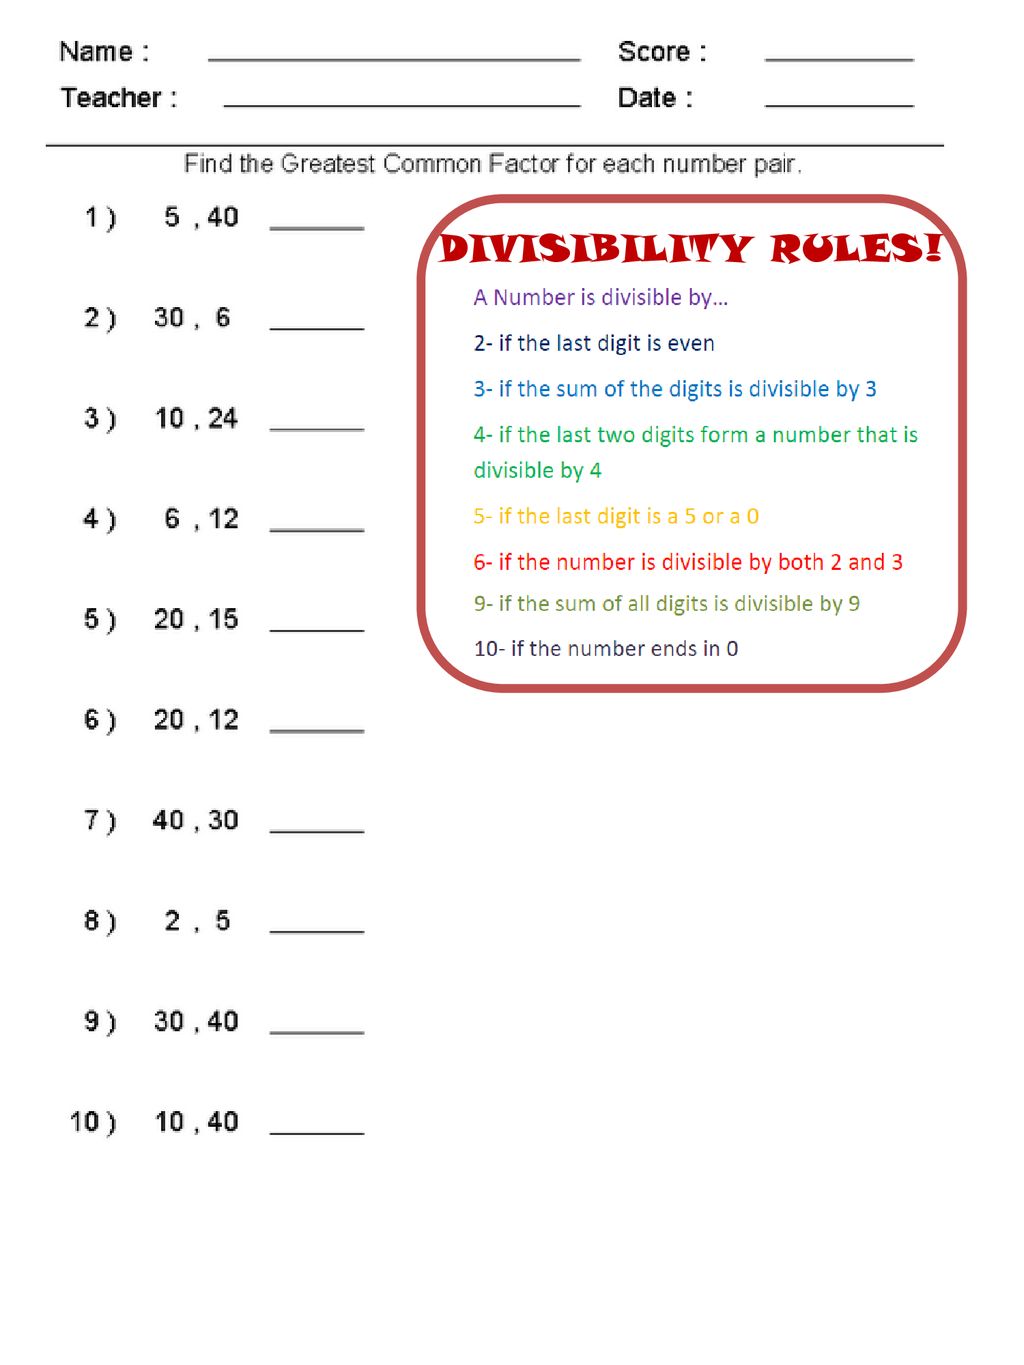 DIVISIBILITY RULES!